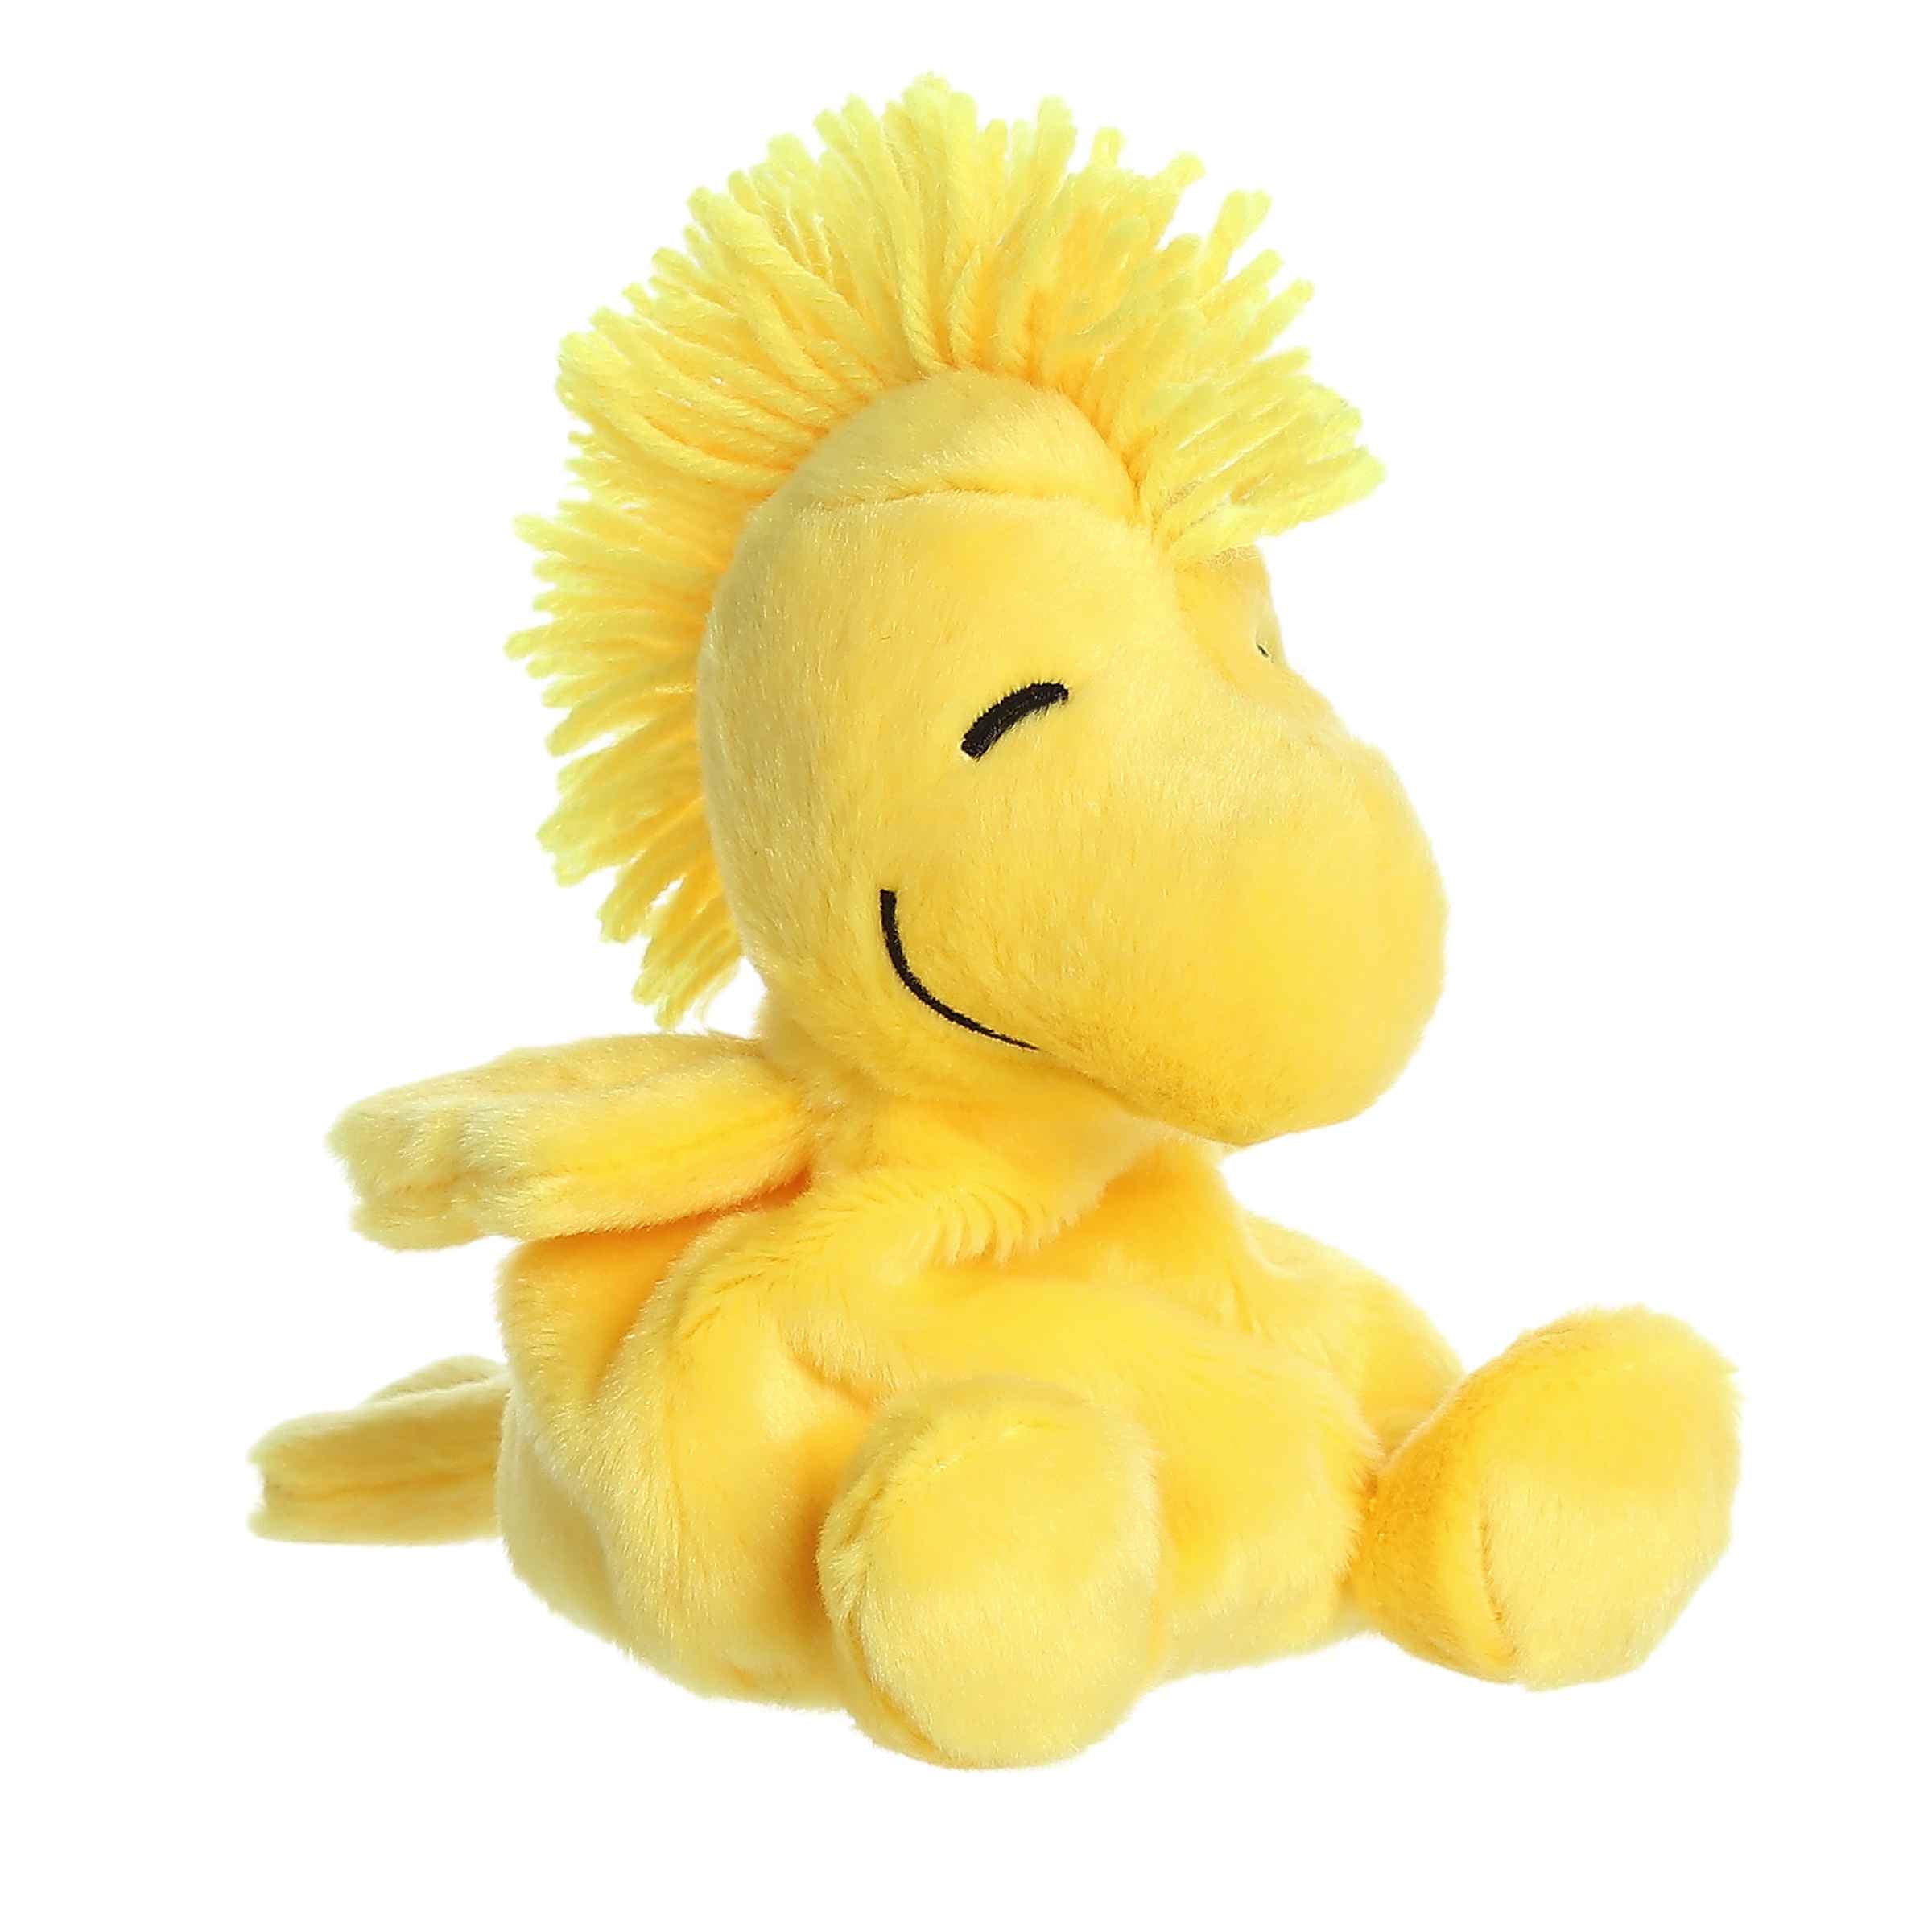 Bright yellow Woodstock Palm Pals plush from the Peanuts collection with tuft of hair, embodies friendship, is a tiny bird